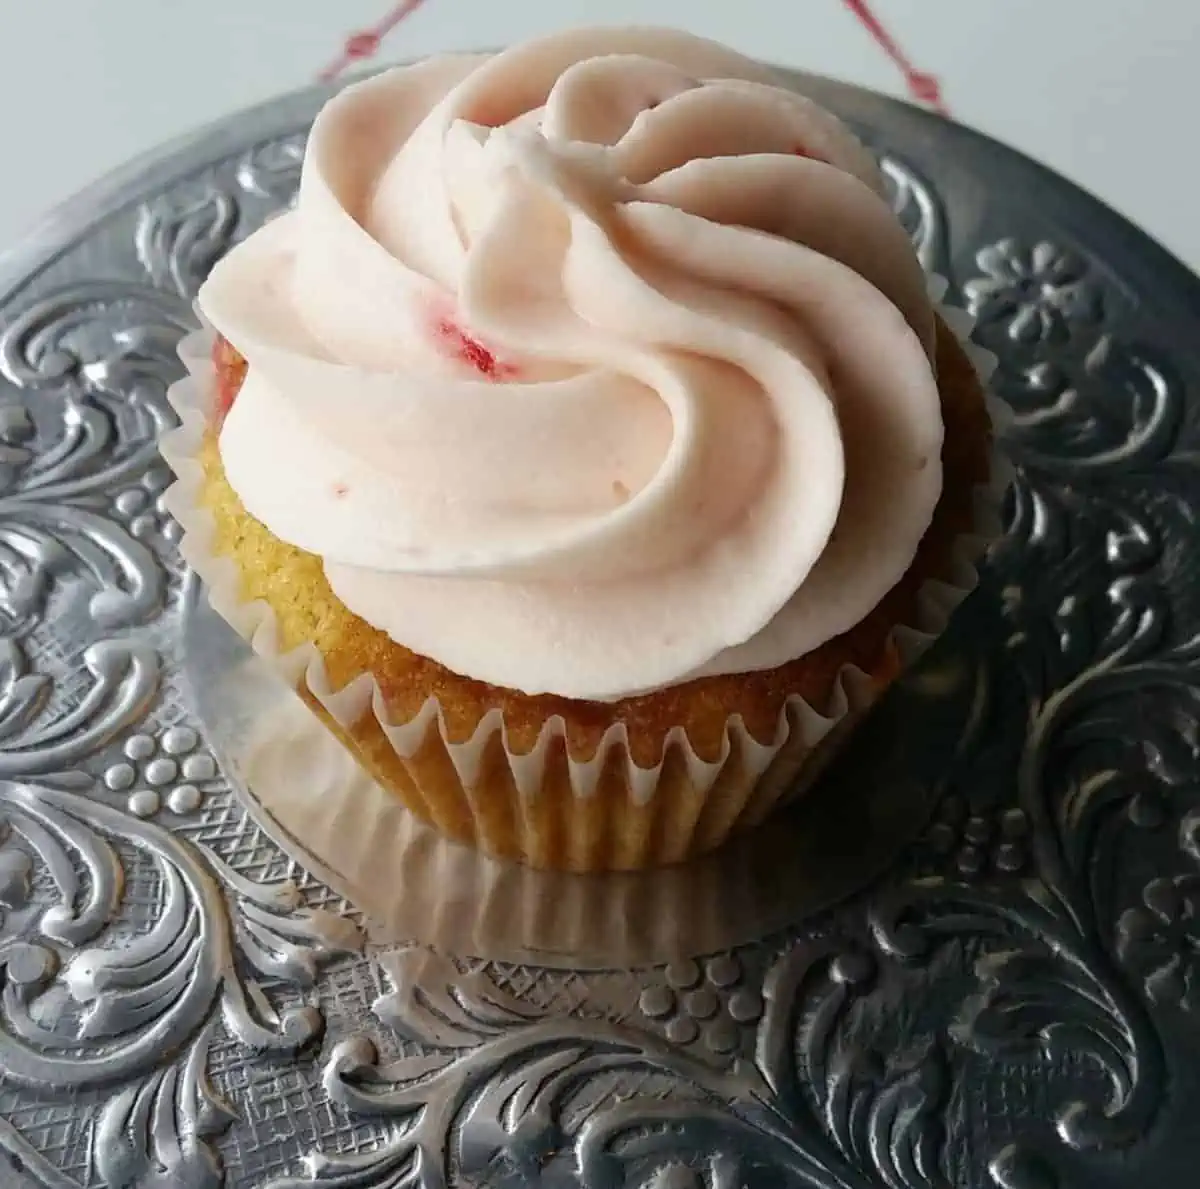 A vegan strawberry cupcake from Short Street Cakes in Asheville.